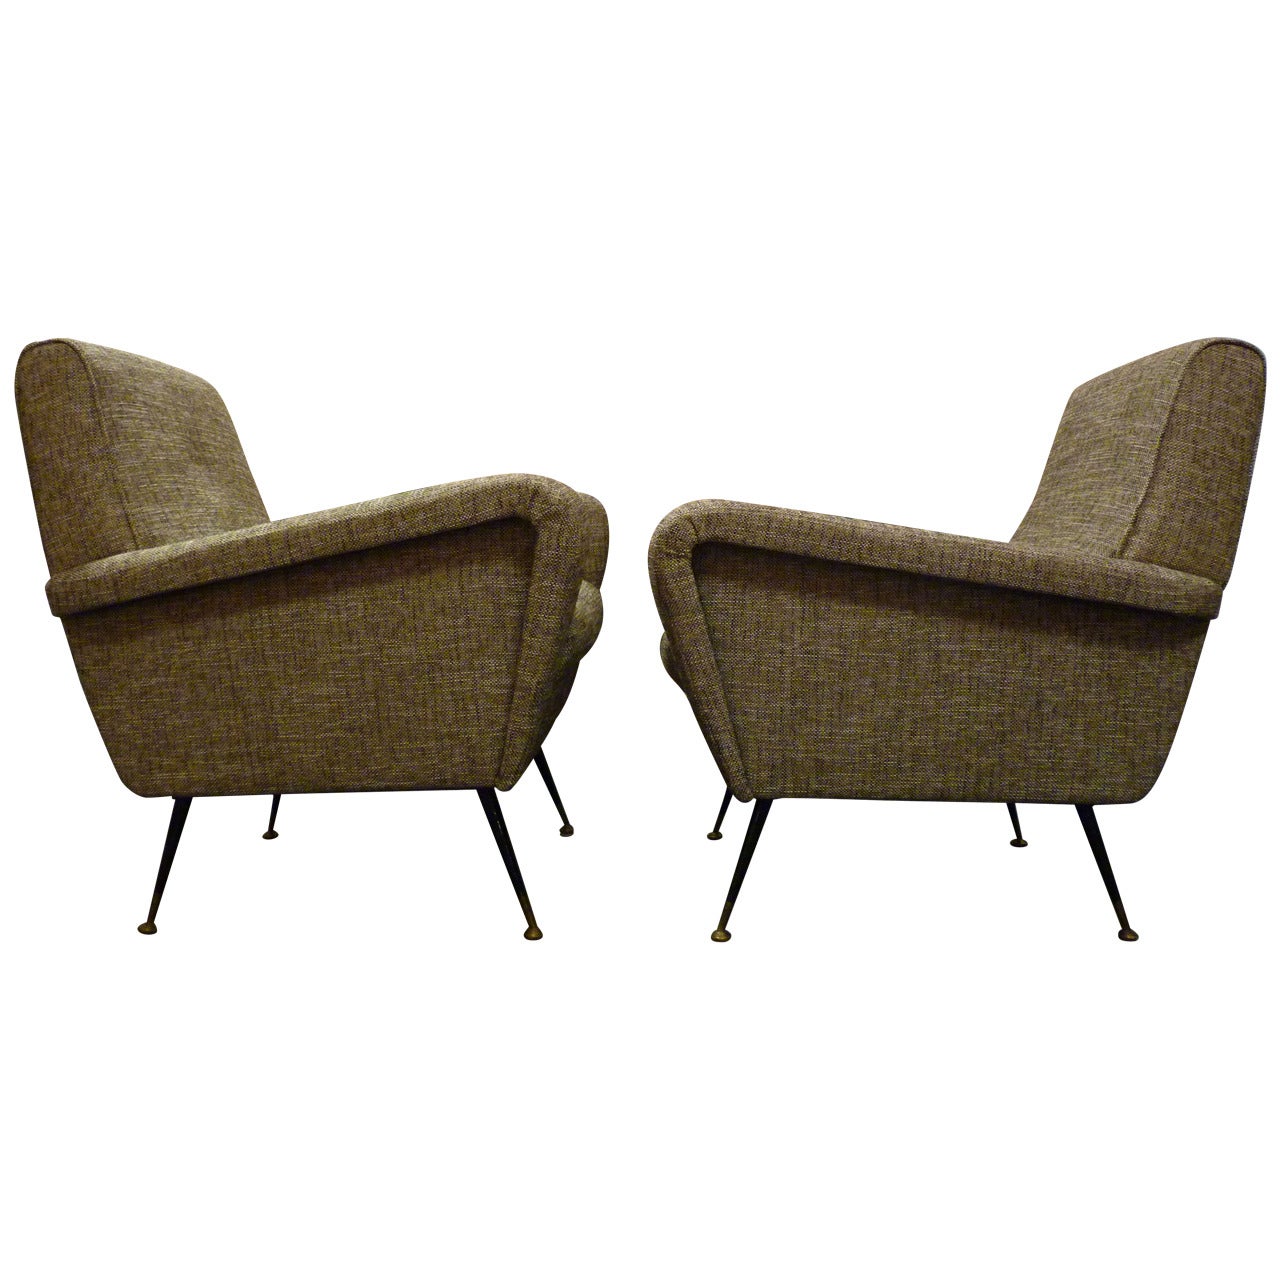 Pair of Large-Scale Modern Italian Chairs